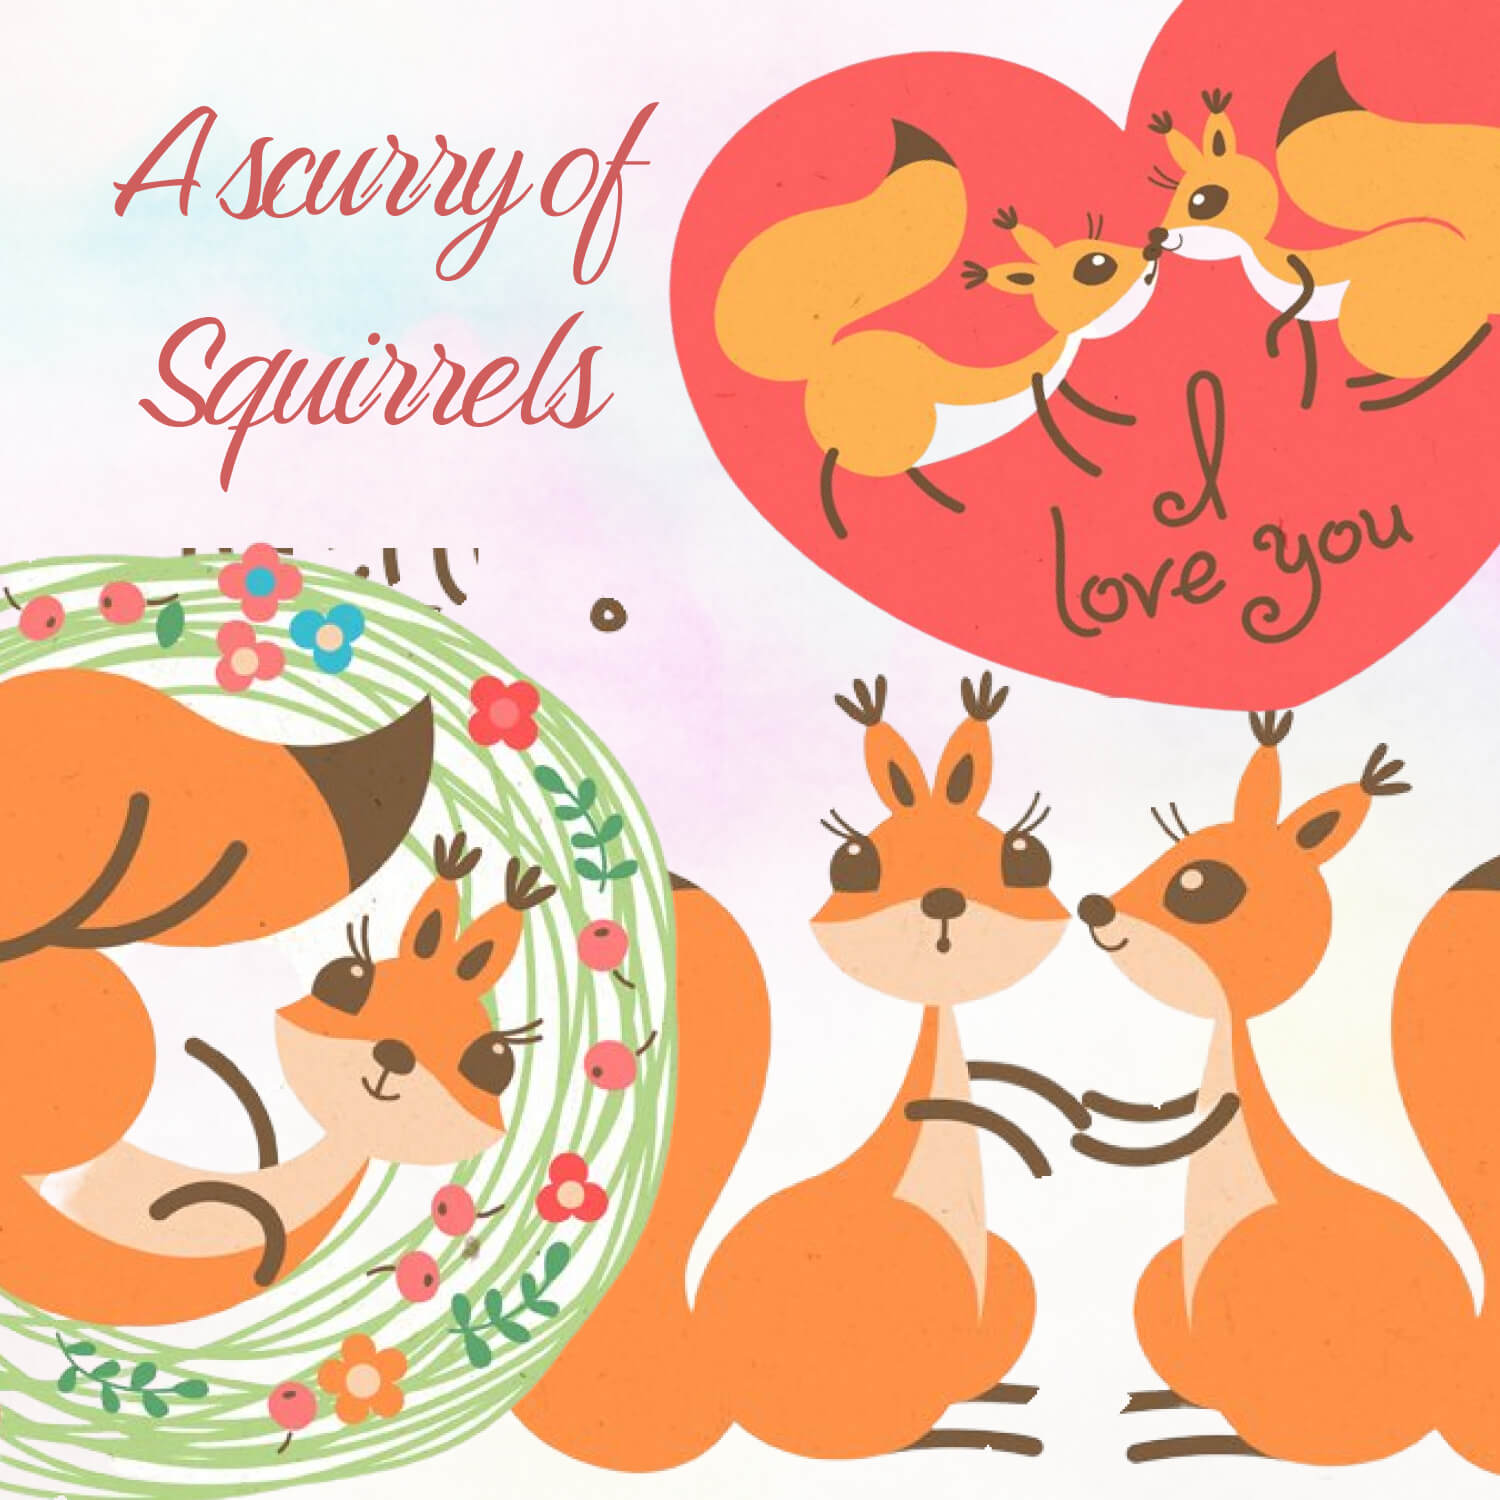 Larger pictures with bright squirrels lonely and in love.